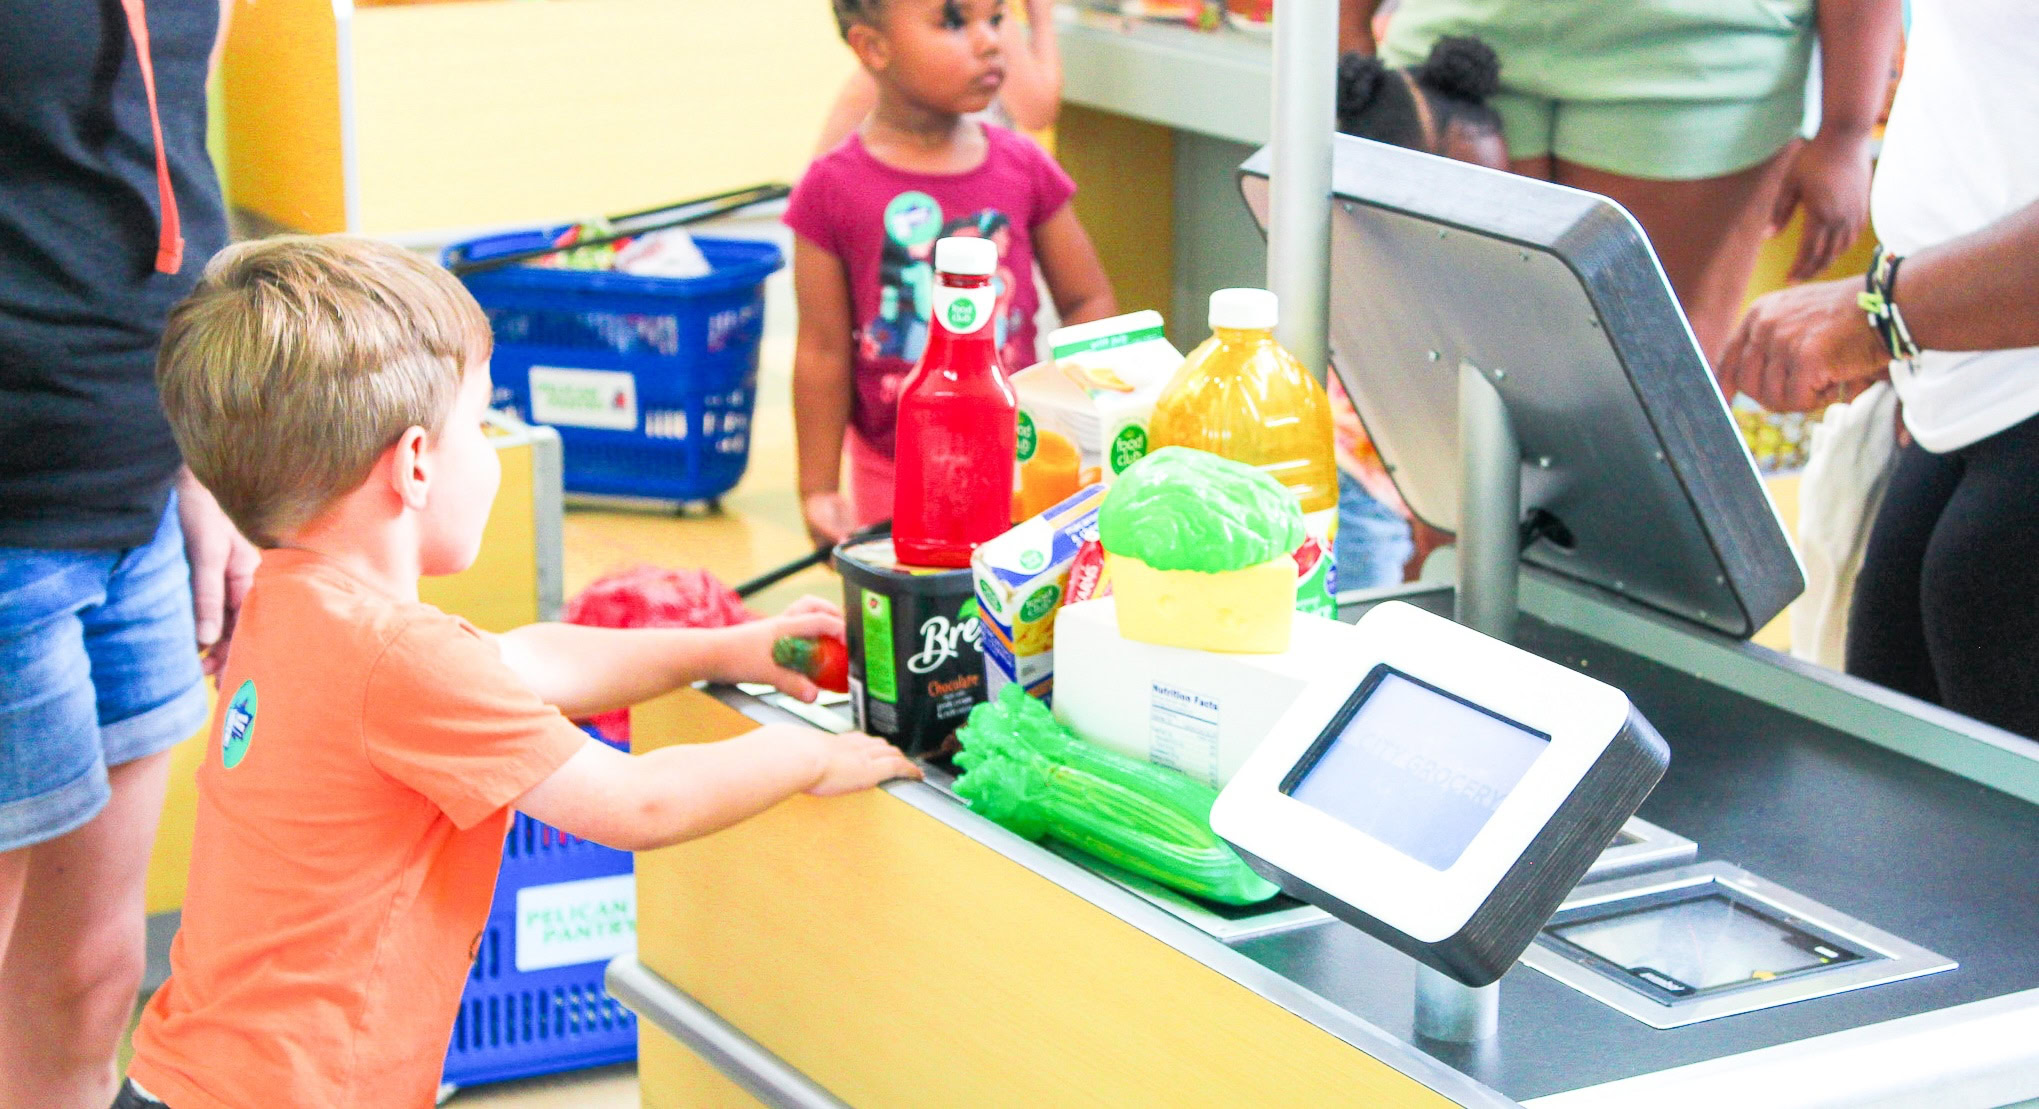 A boy in line with various items at a pretend grocery store register